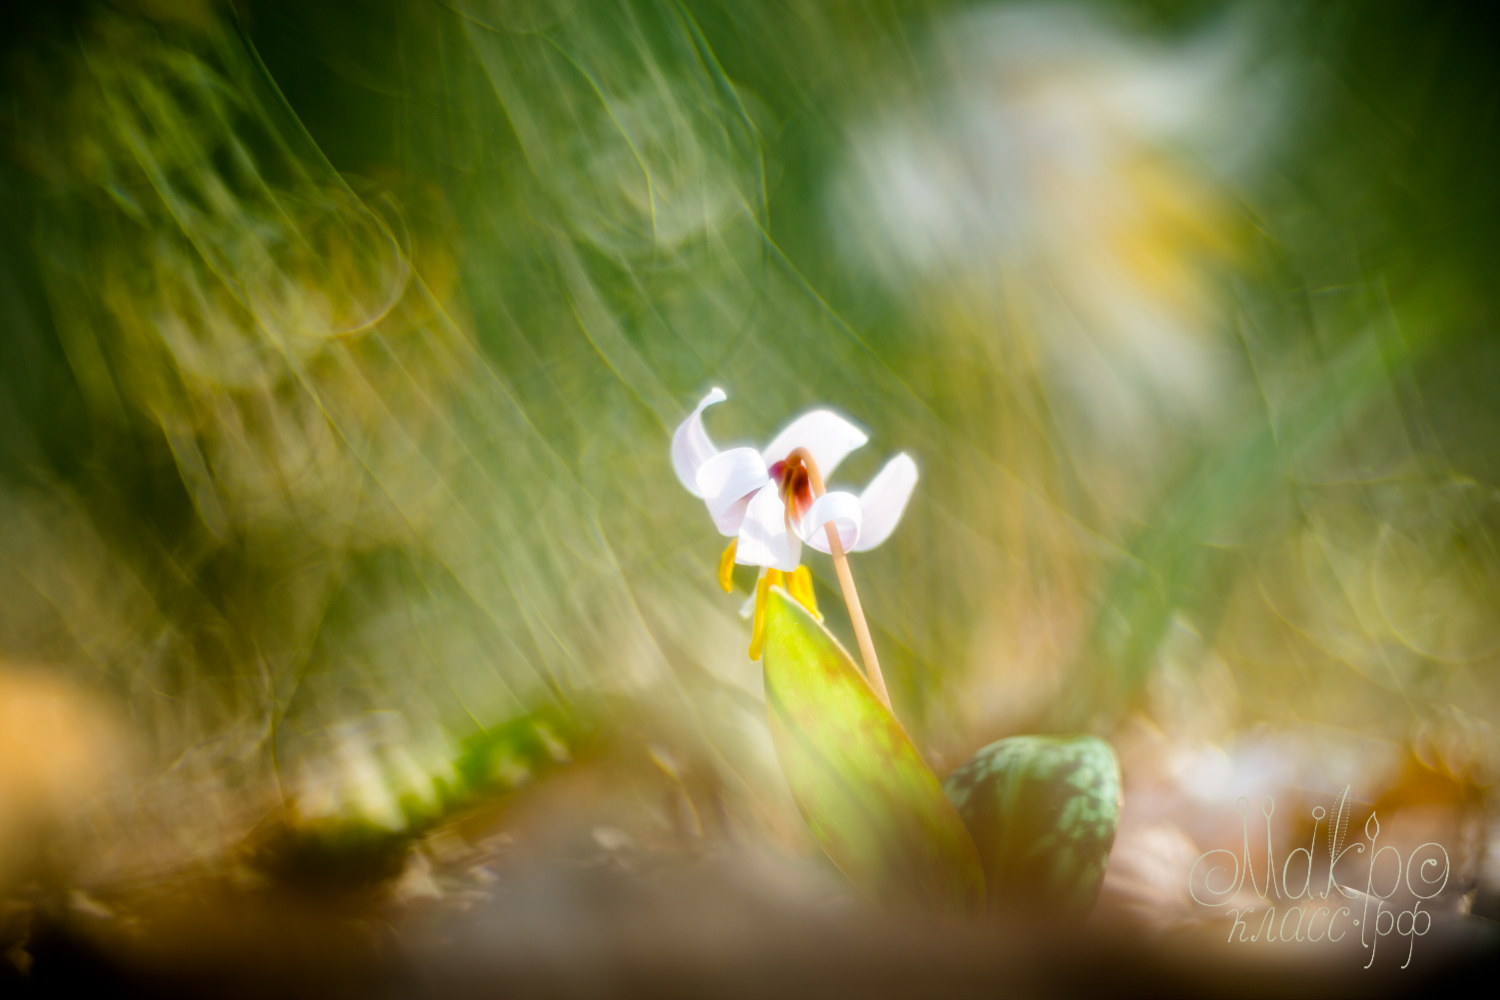 Erythronium in the wilds of space-time